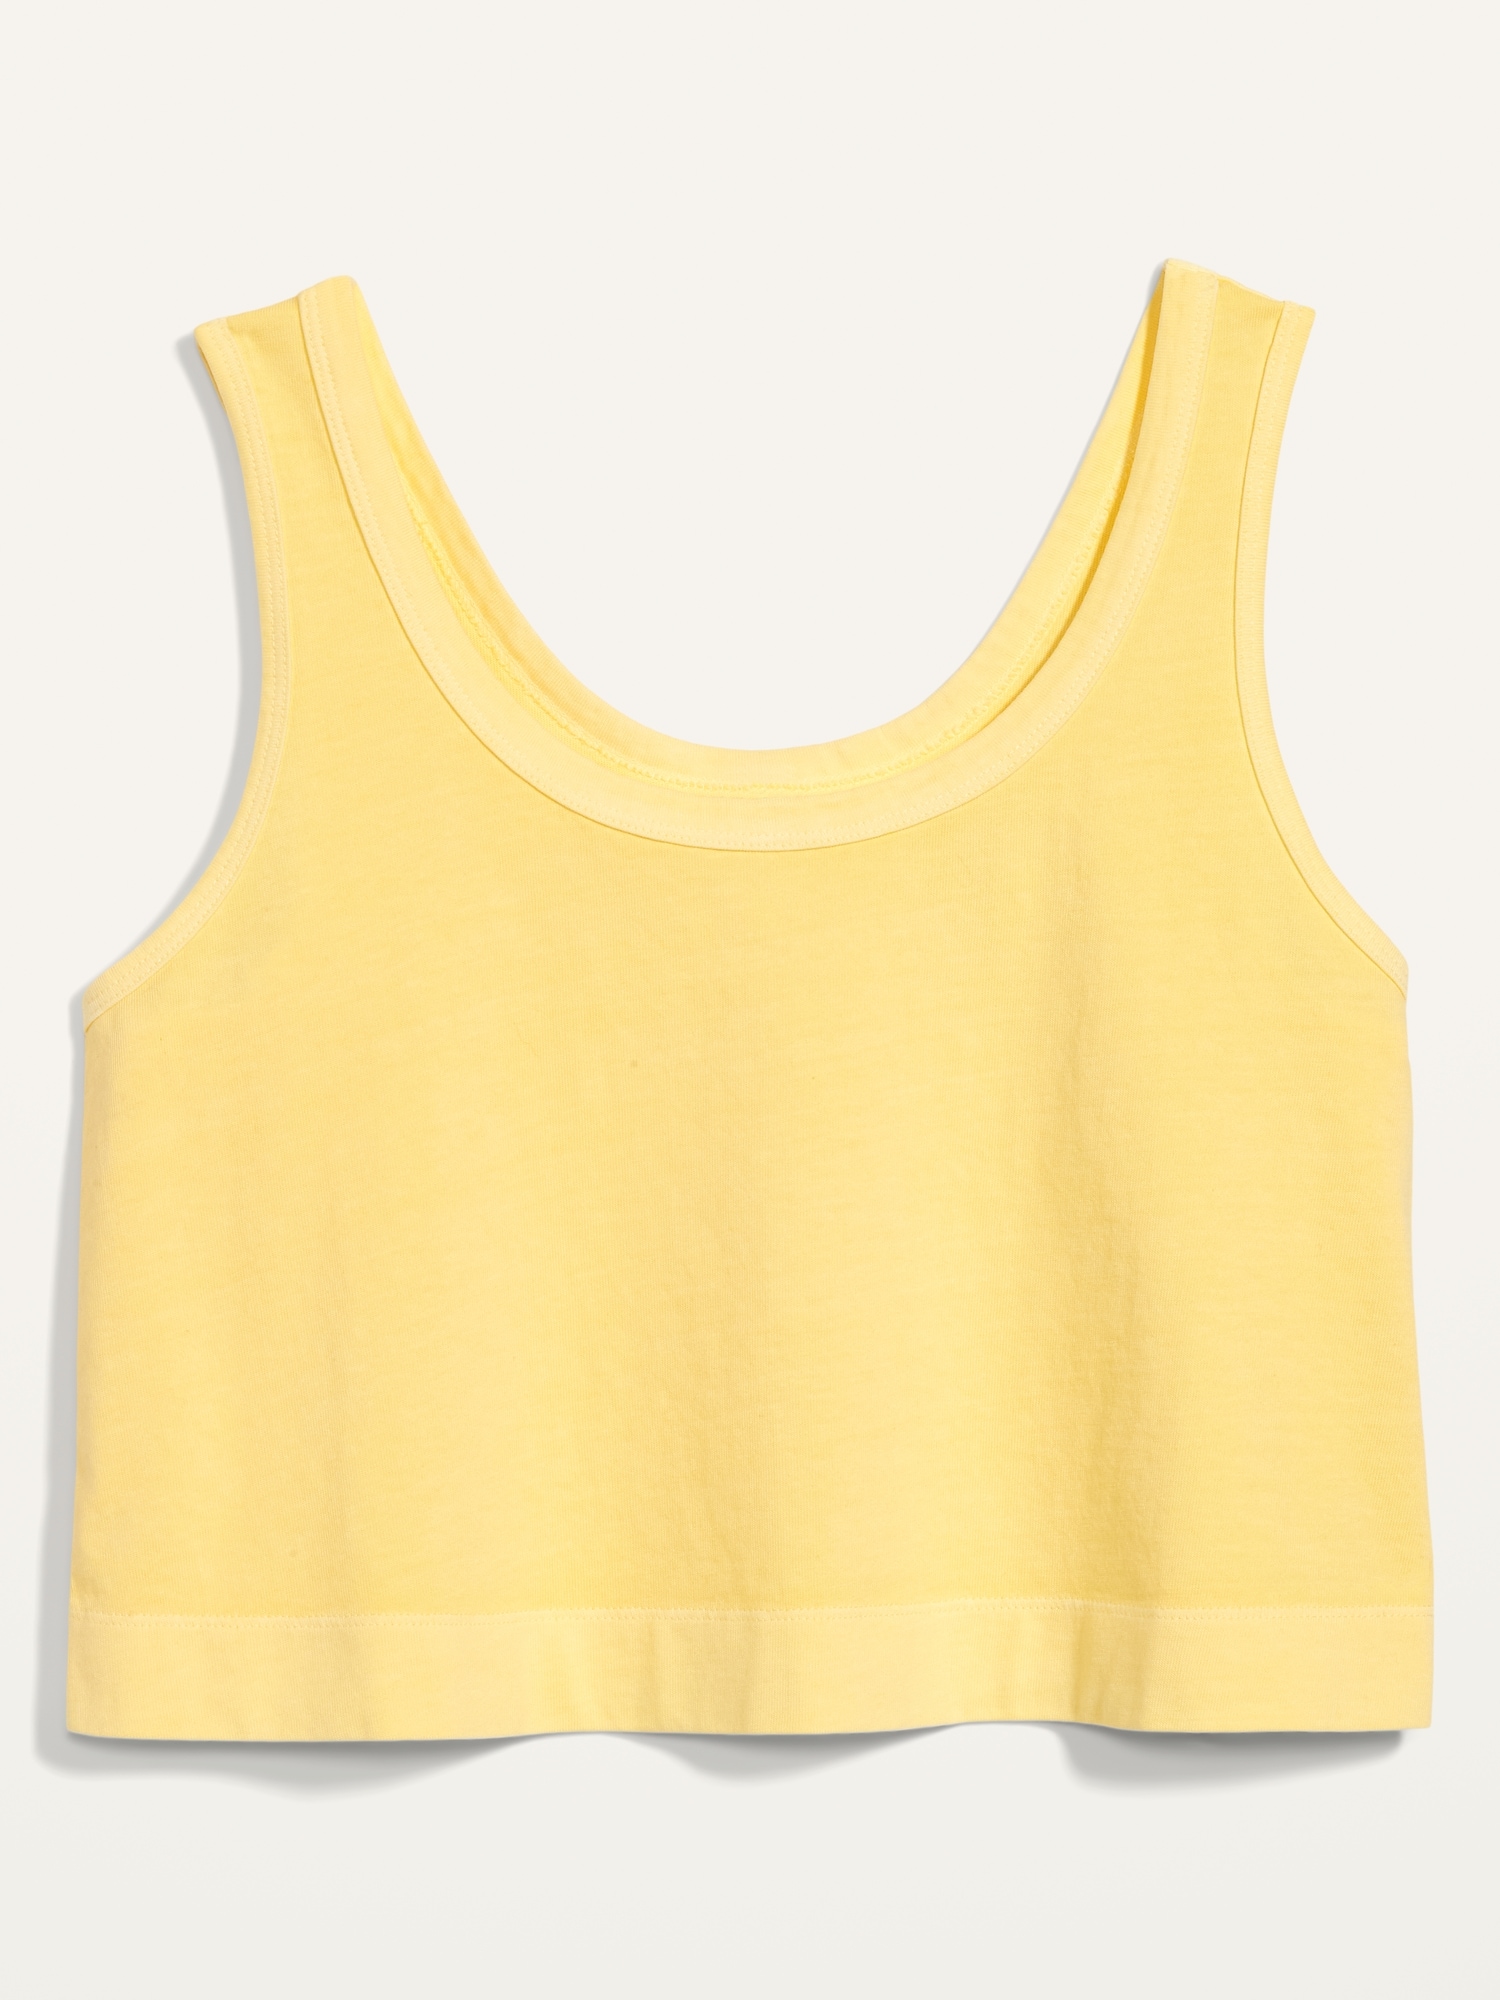 Cropped Vintage Garment-Dyed Tank Top for Women